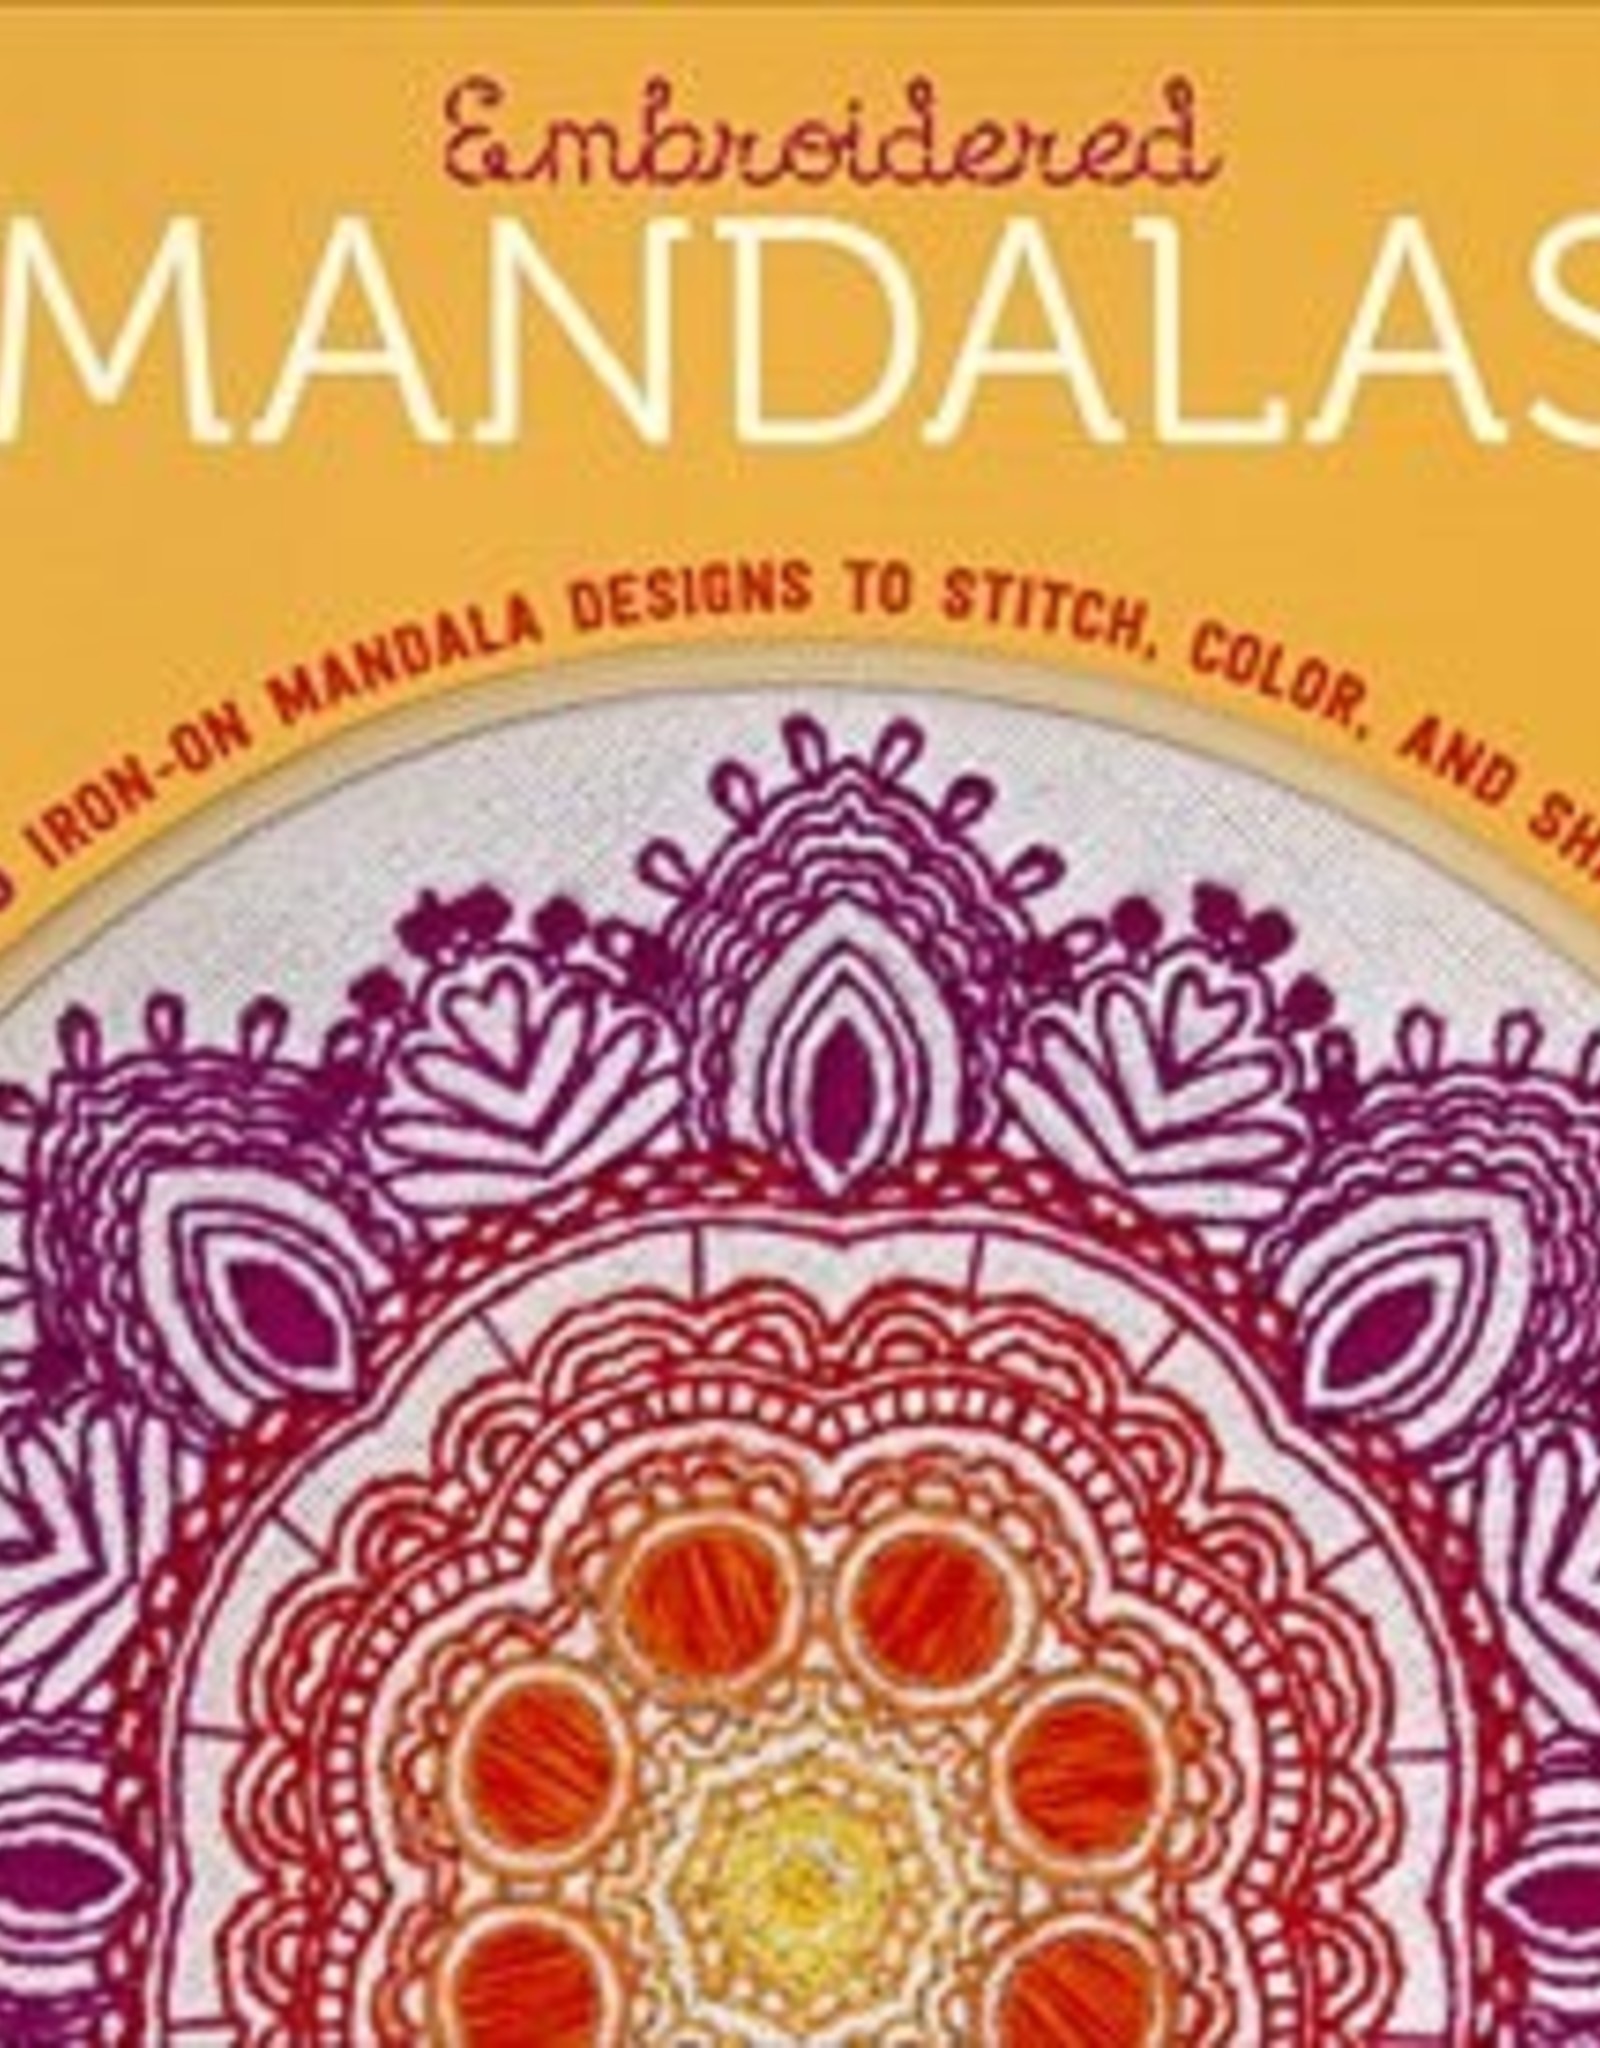 Embroidered Mandalas: 25 Iron-On Mandala Designs to Stitch, Color, and Share by Lark Publications